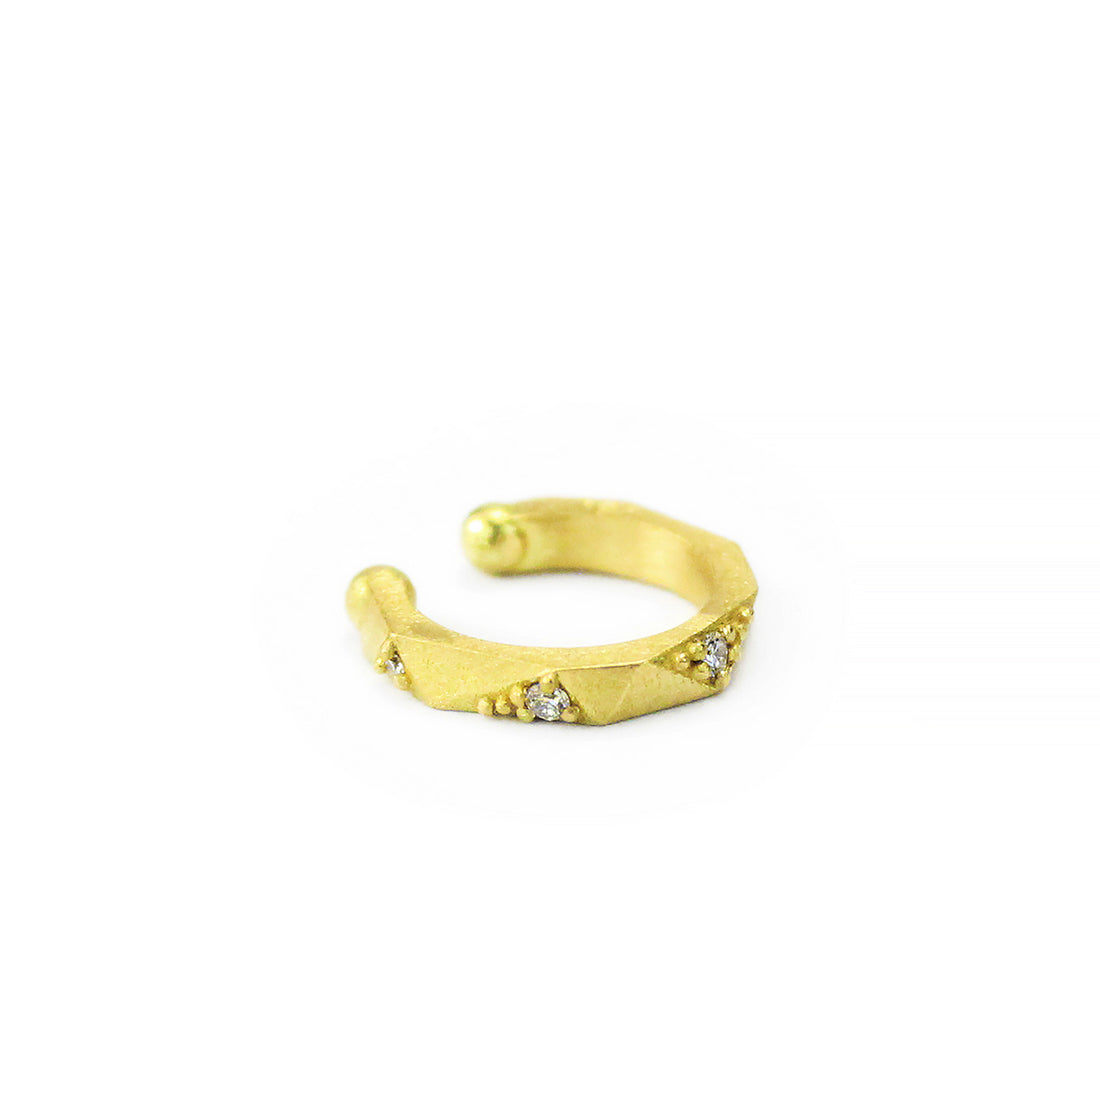 Buy Trishty 18kt 750 Yellow Gold Ring For Women,Daily purpose  use,marriage,gift some one u love, occasionally,festive. at Amazon.in